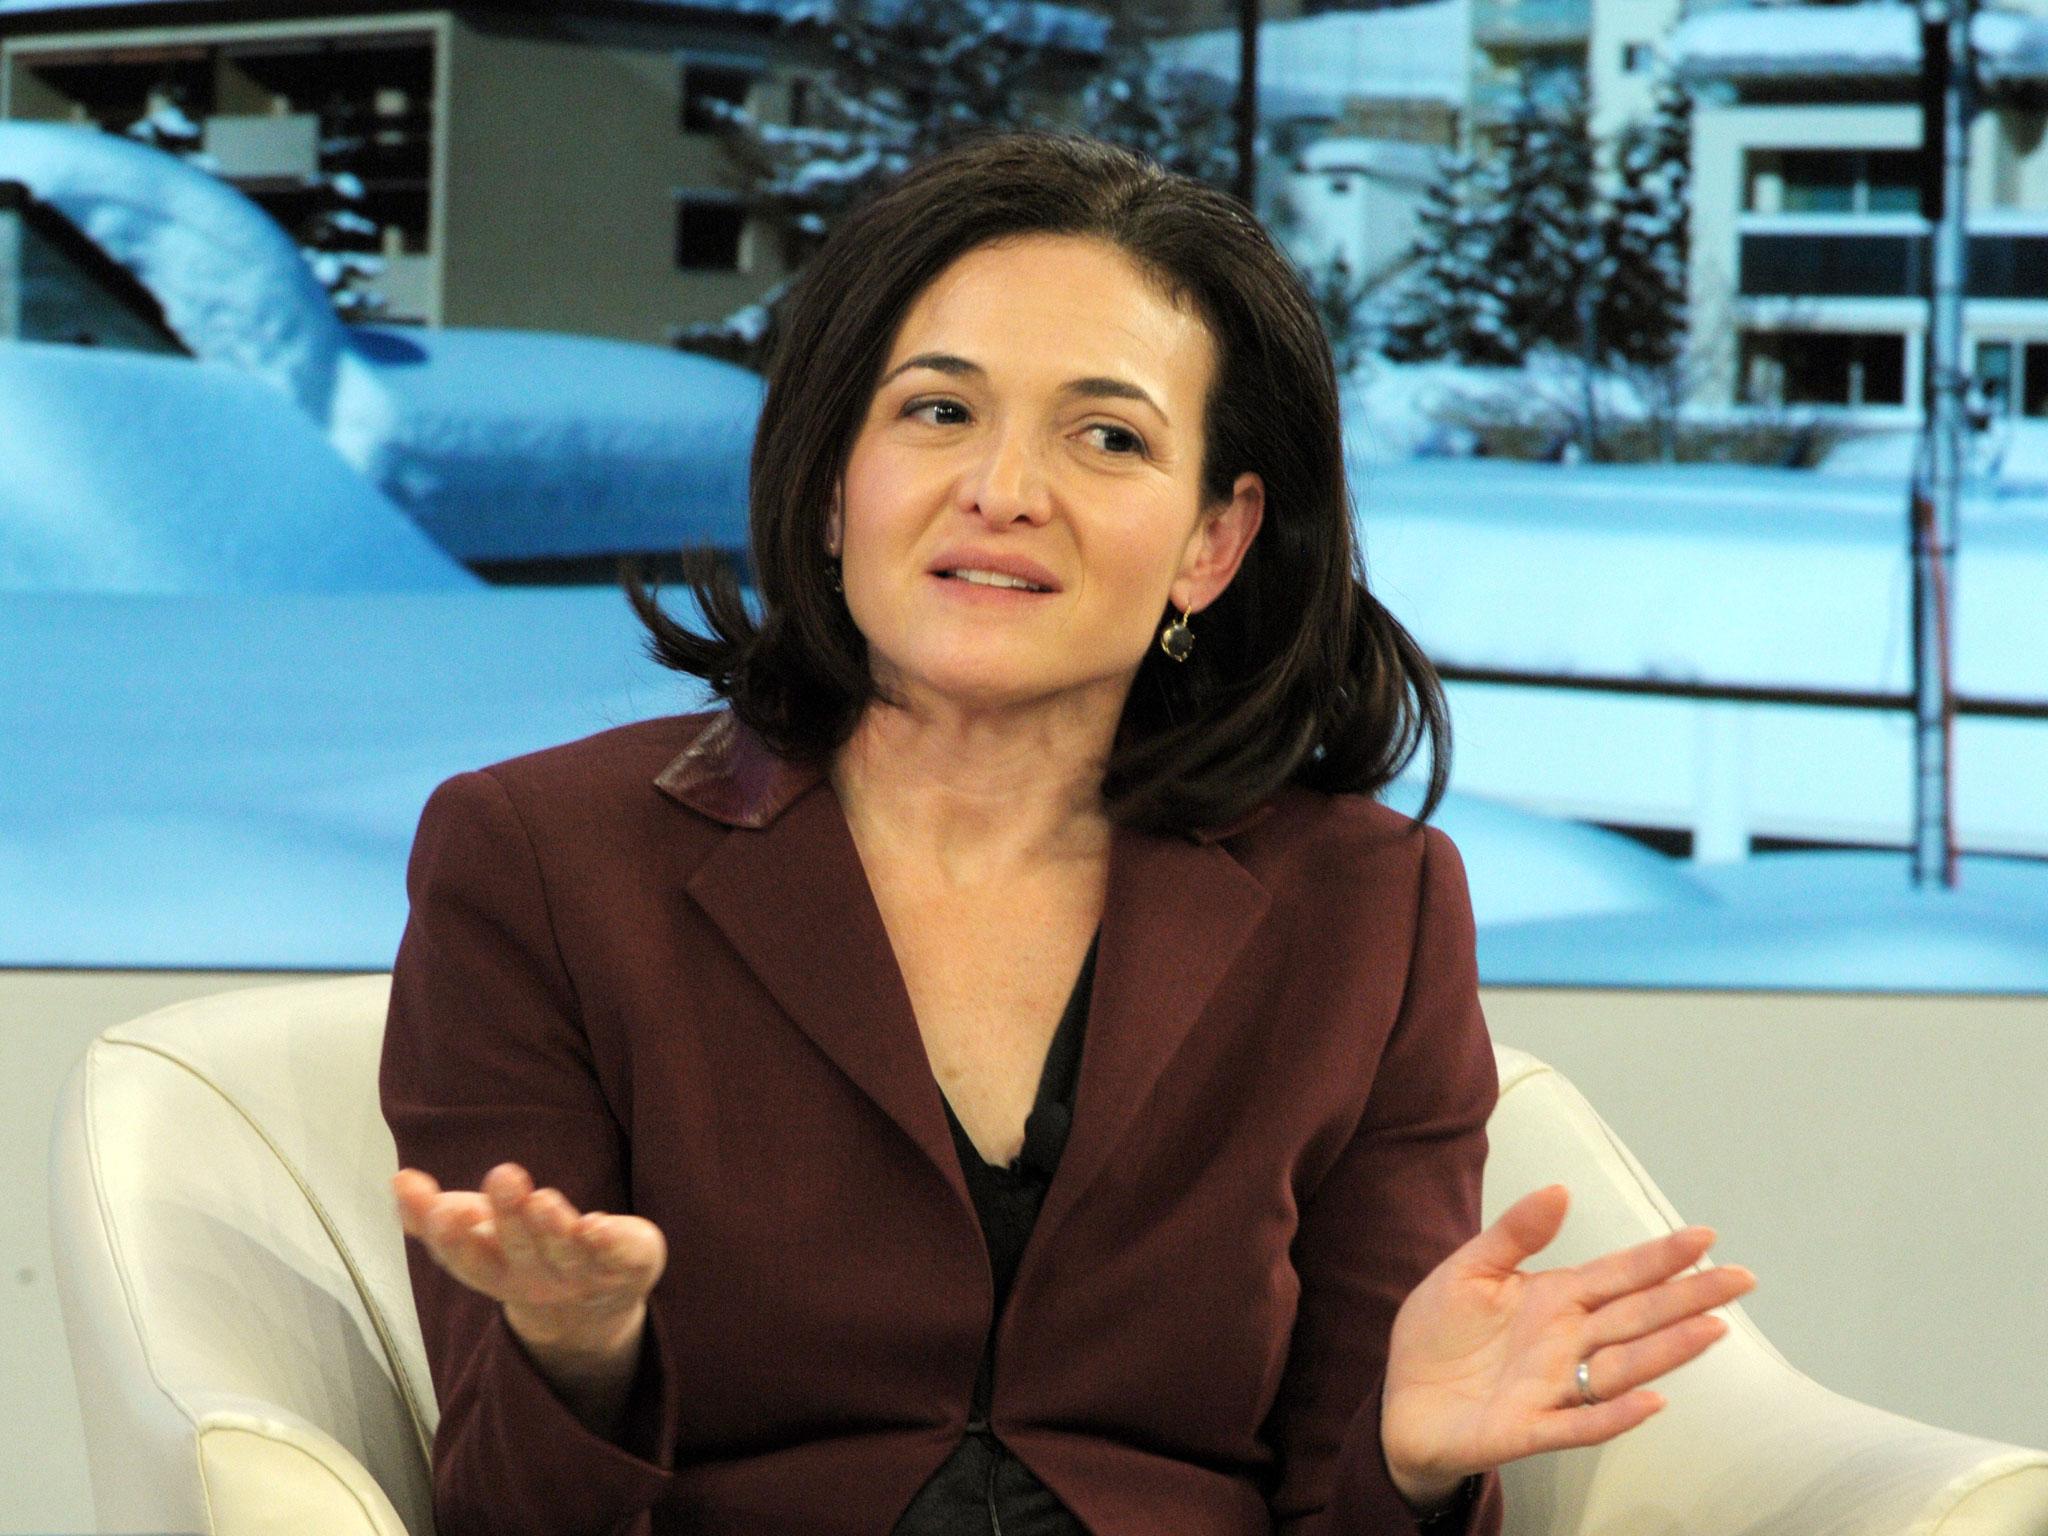 Facebook’s chief operating officer advises on better pay for women